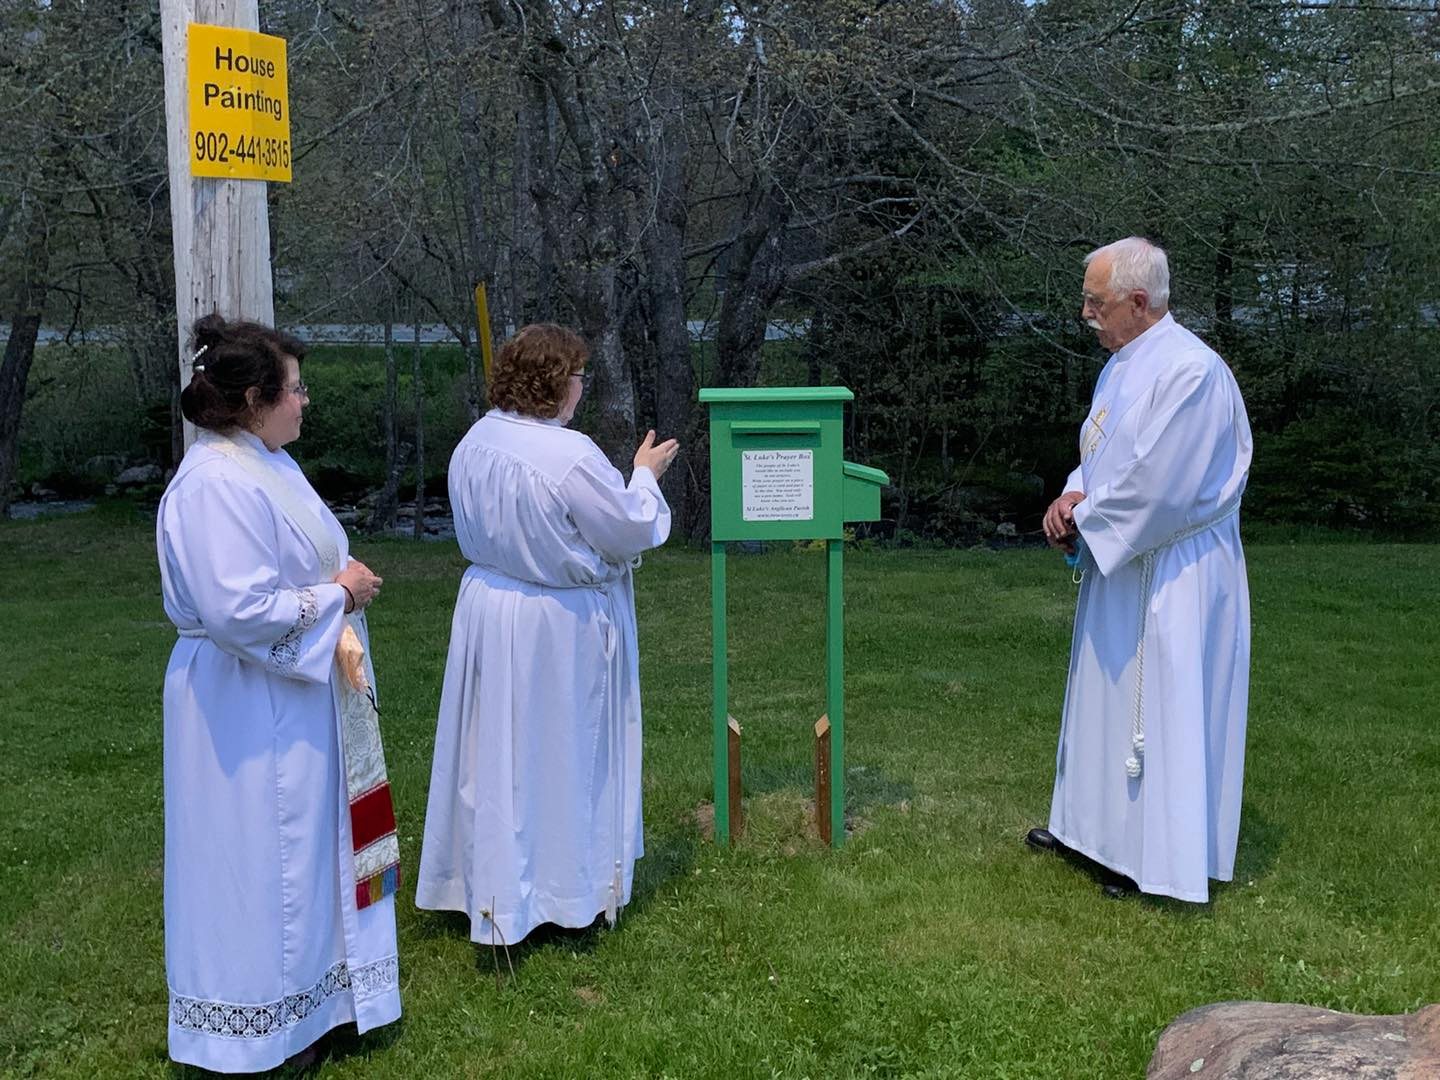 Jerry Cavanaugh's Ordination Service & Blessing of Prayer Box - May 27, 2022